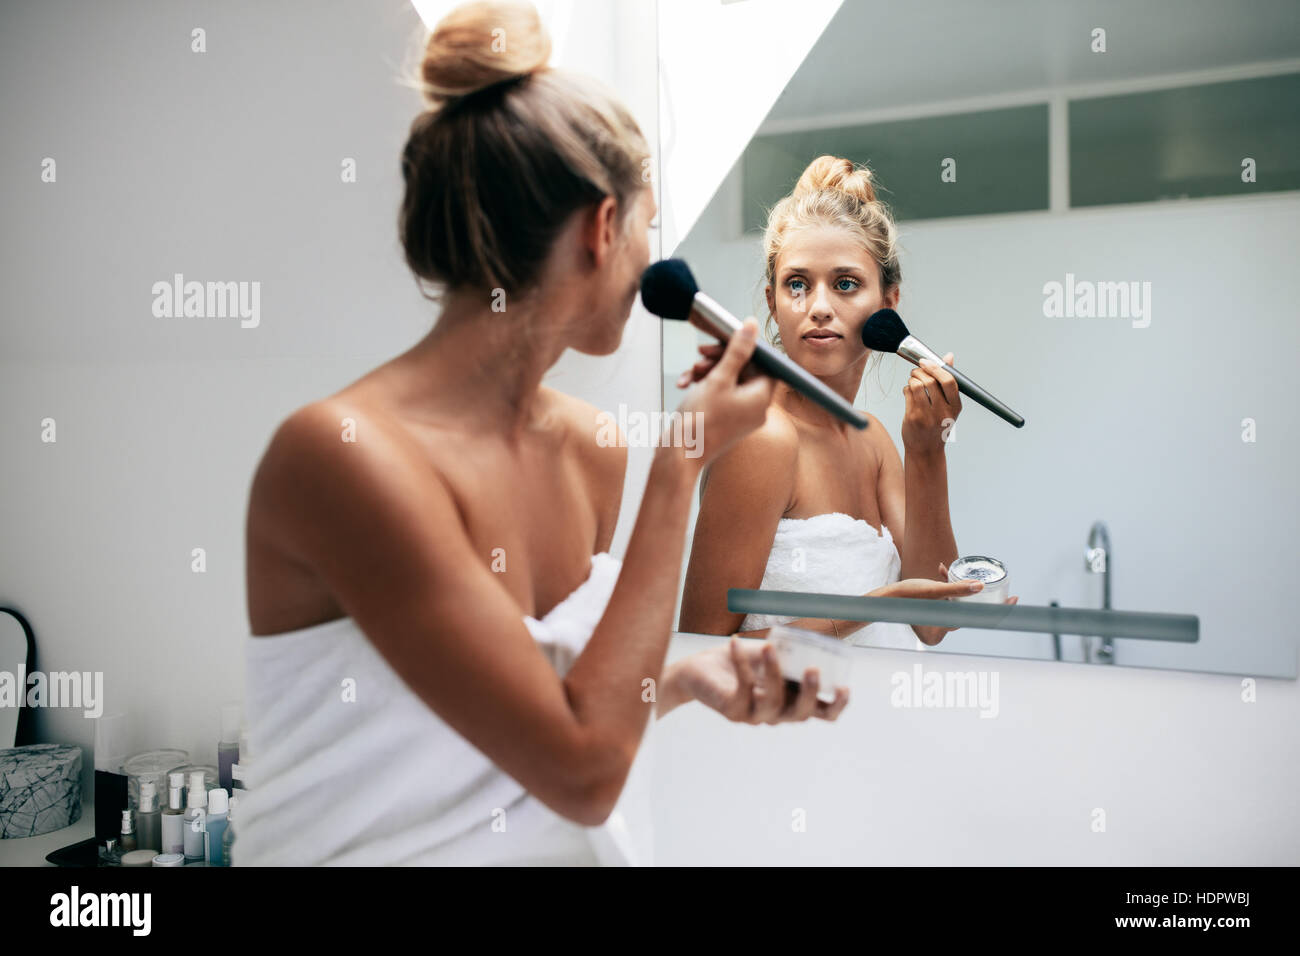 Beautiful female applying cosmetics on her face in bathroom. Female looking into the bathroom mirror and putting on makeup. Stock Photo